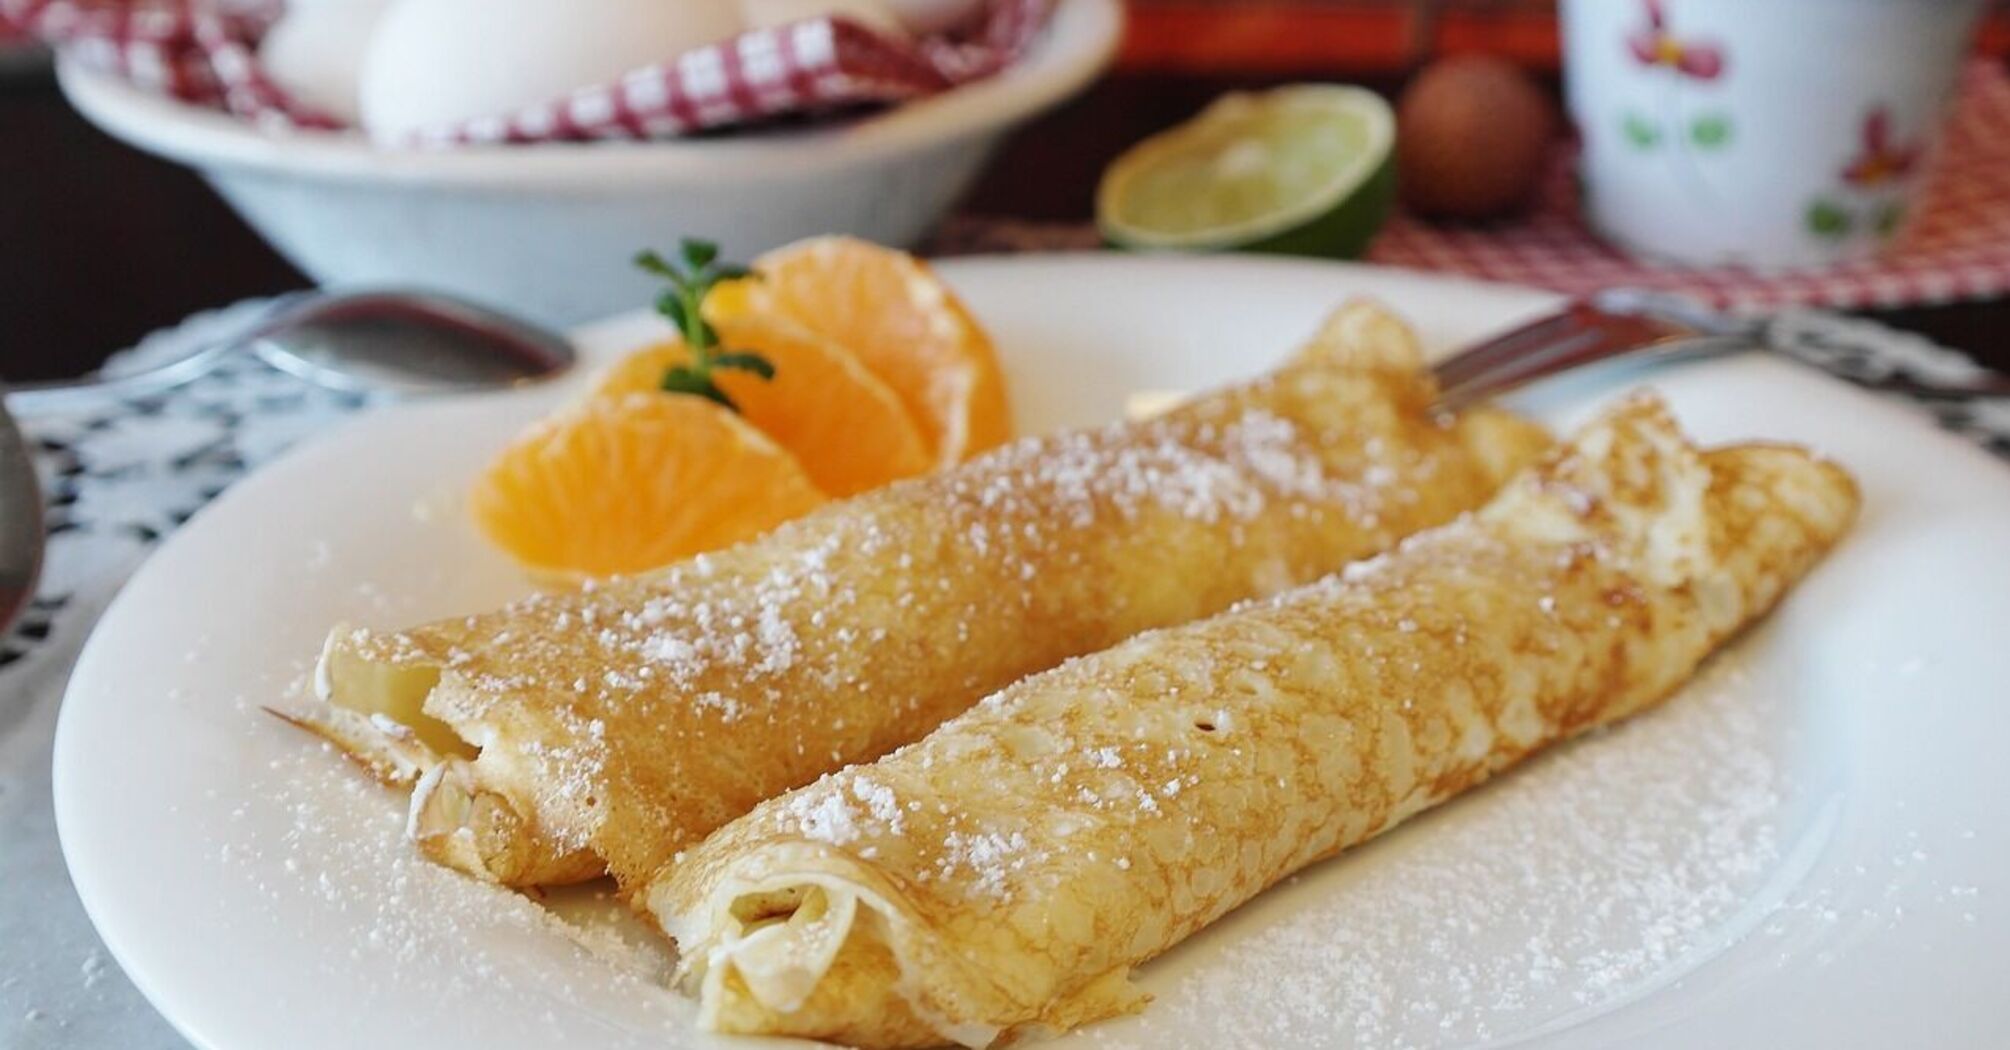 The perfect snack during Shrovetide: pancakes with apple filling